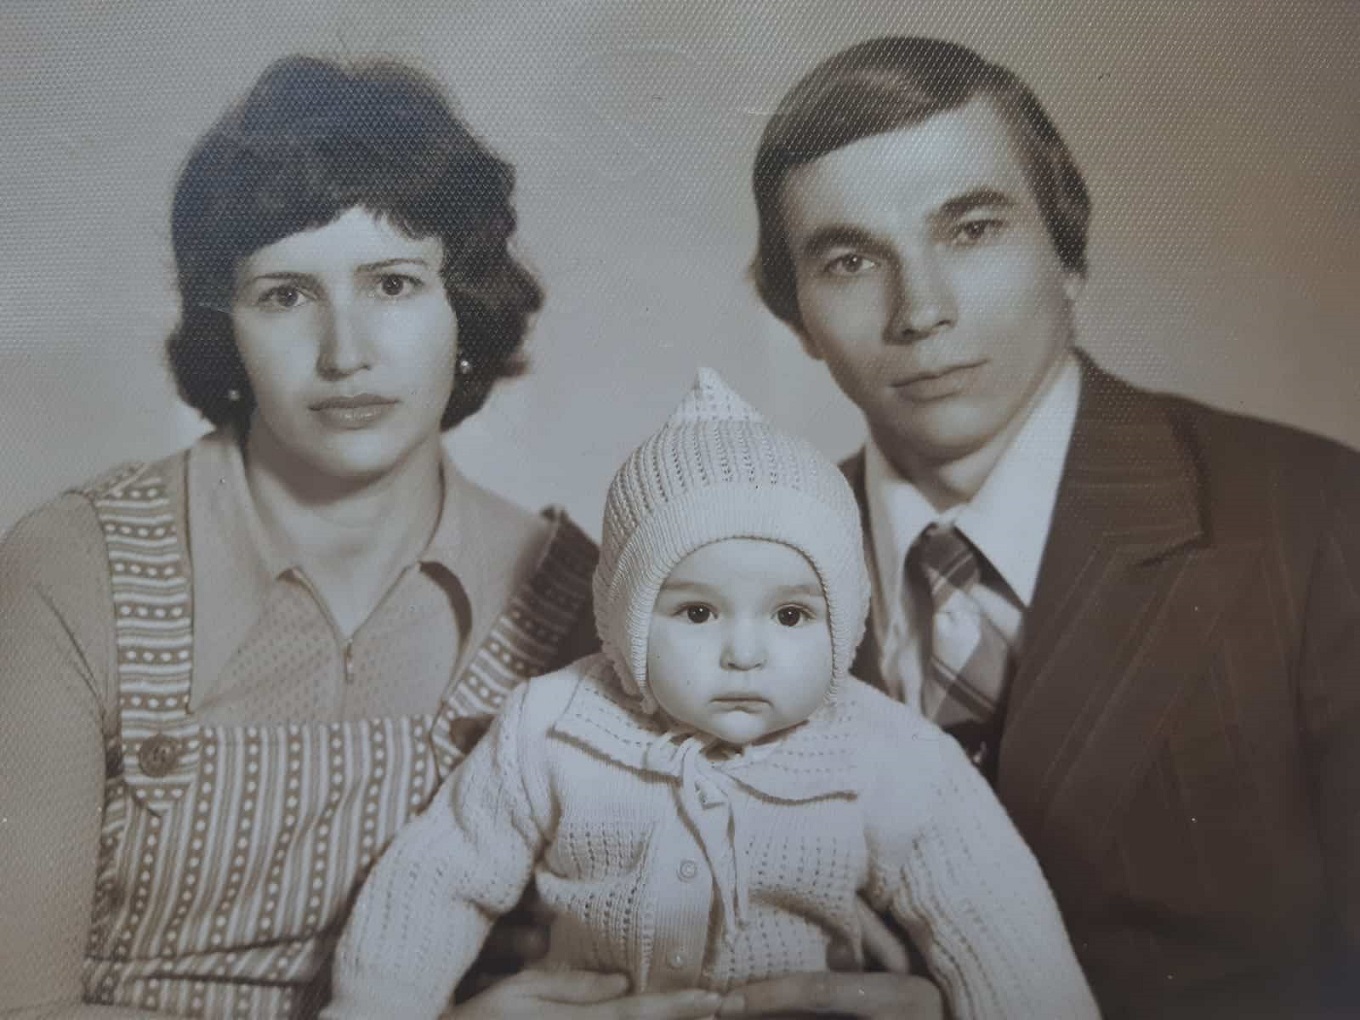 Ira Tolchin Immergluck as a baby with her parents (via Zman Yisrael)